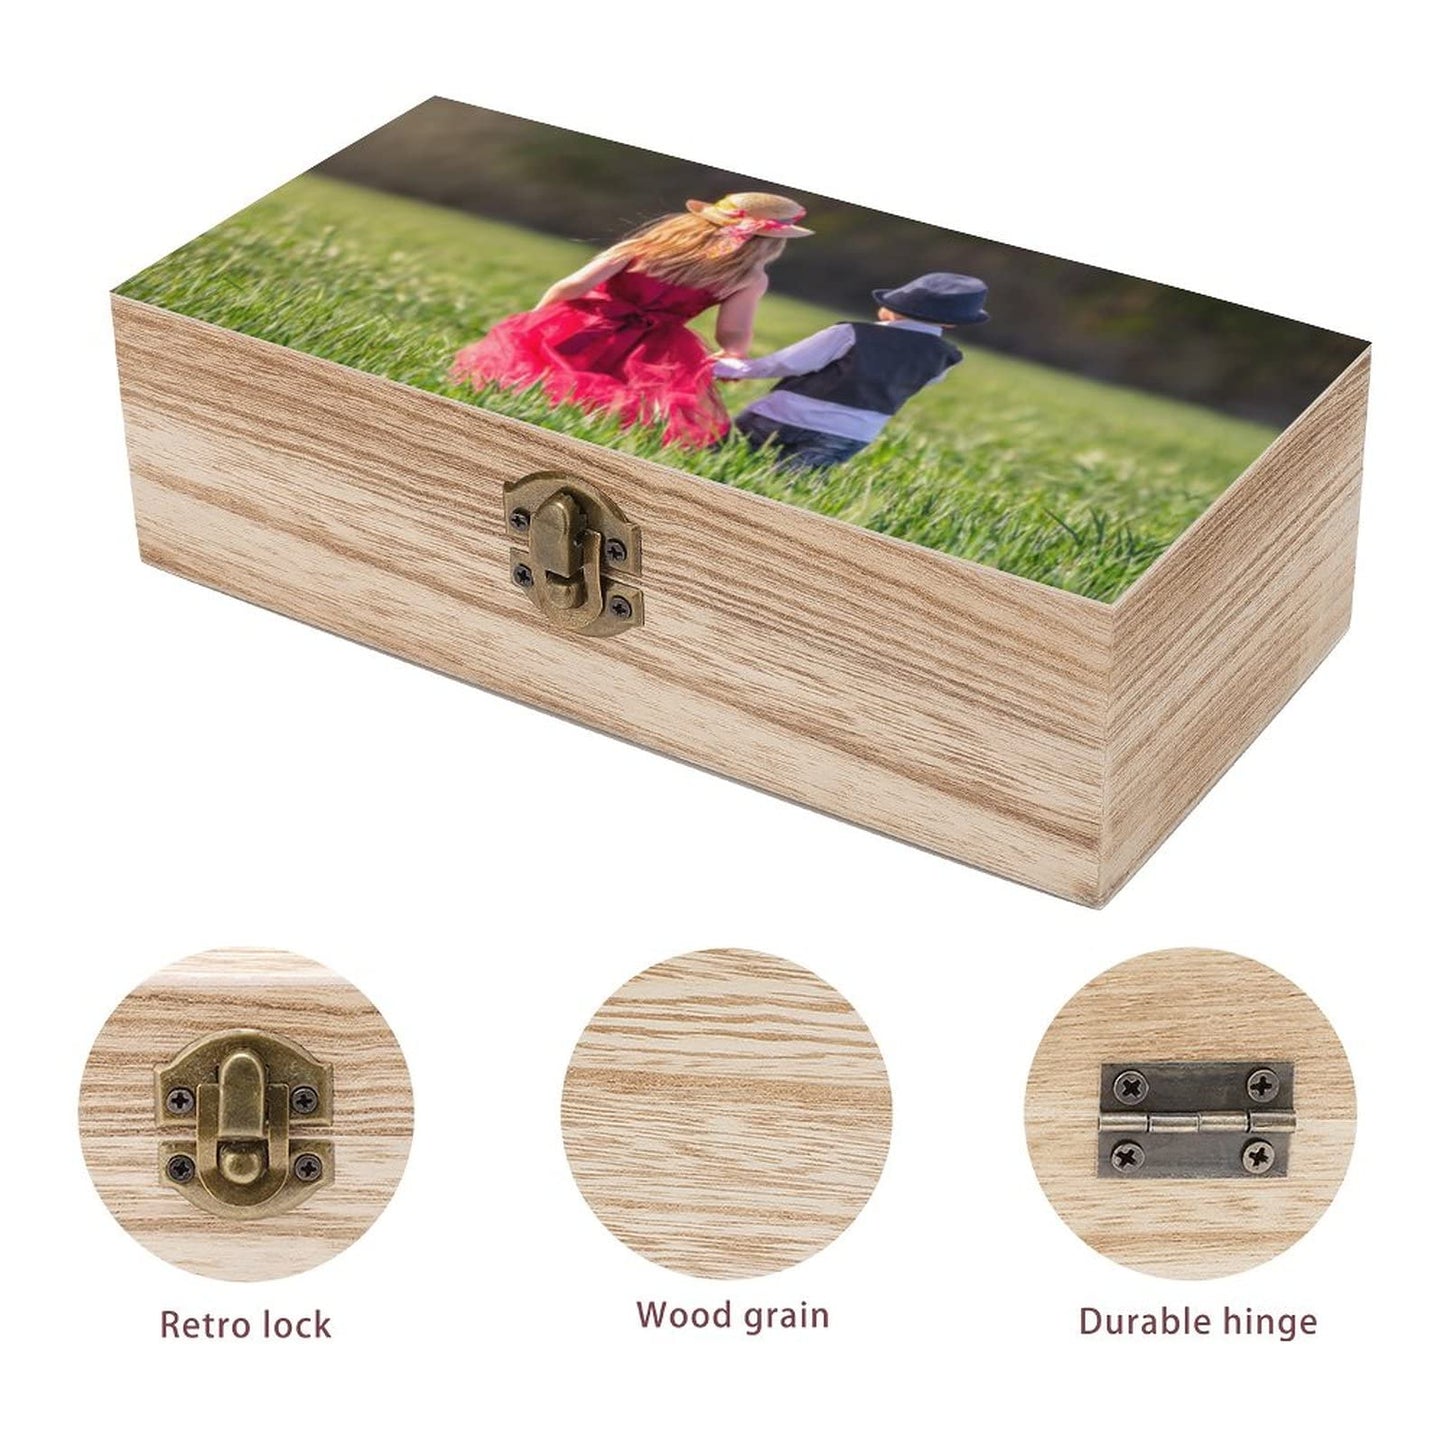 Custom Wooden Storage Box with Lid and Lock, Personalized Design Your Keepsake Box with Picture Text, Add Photo Logo Decorative Wooden Box for Home